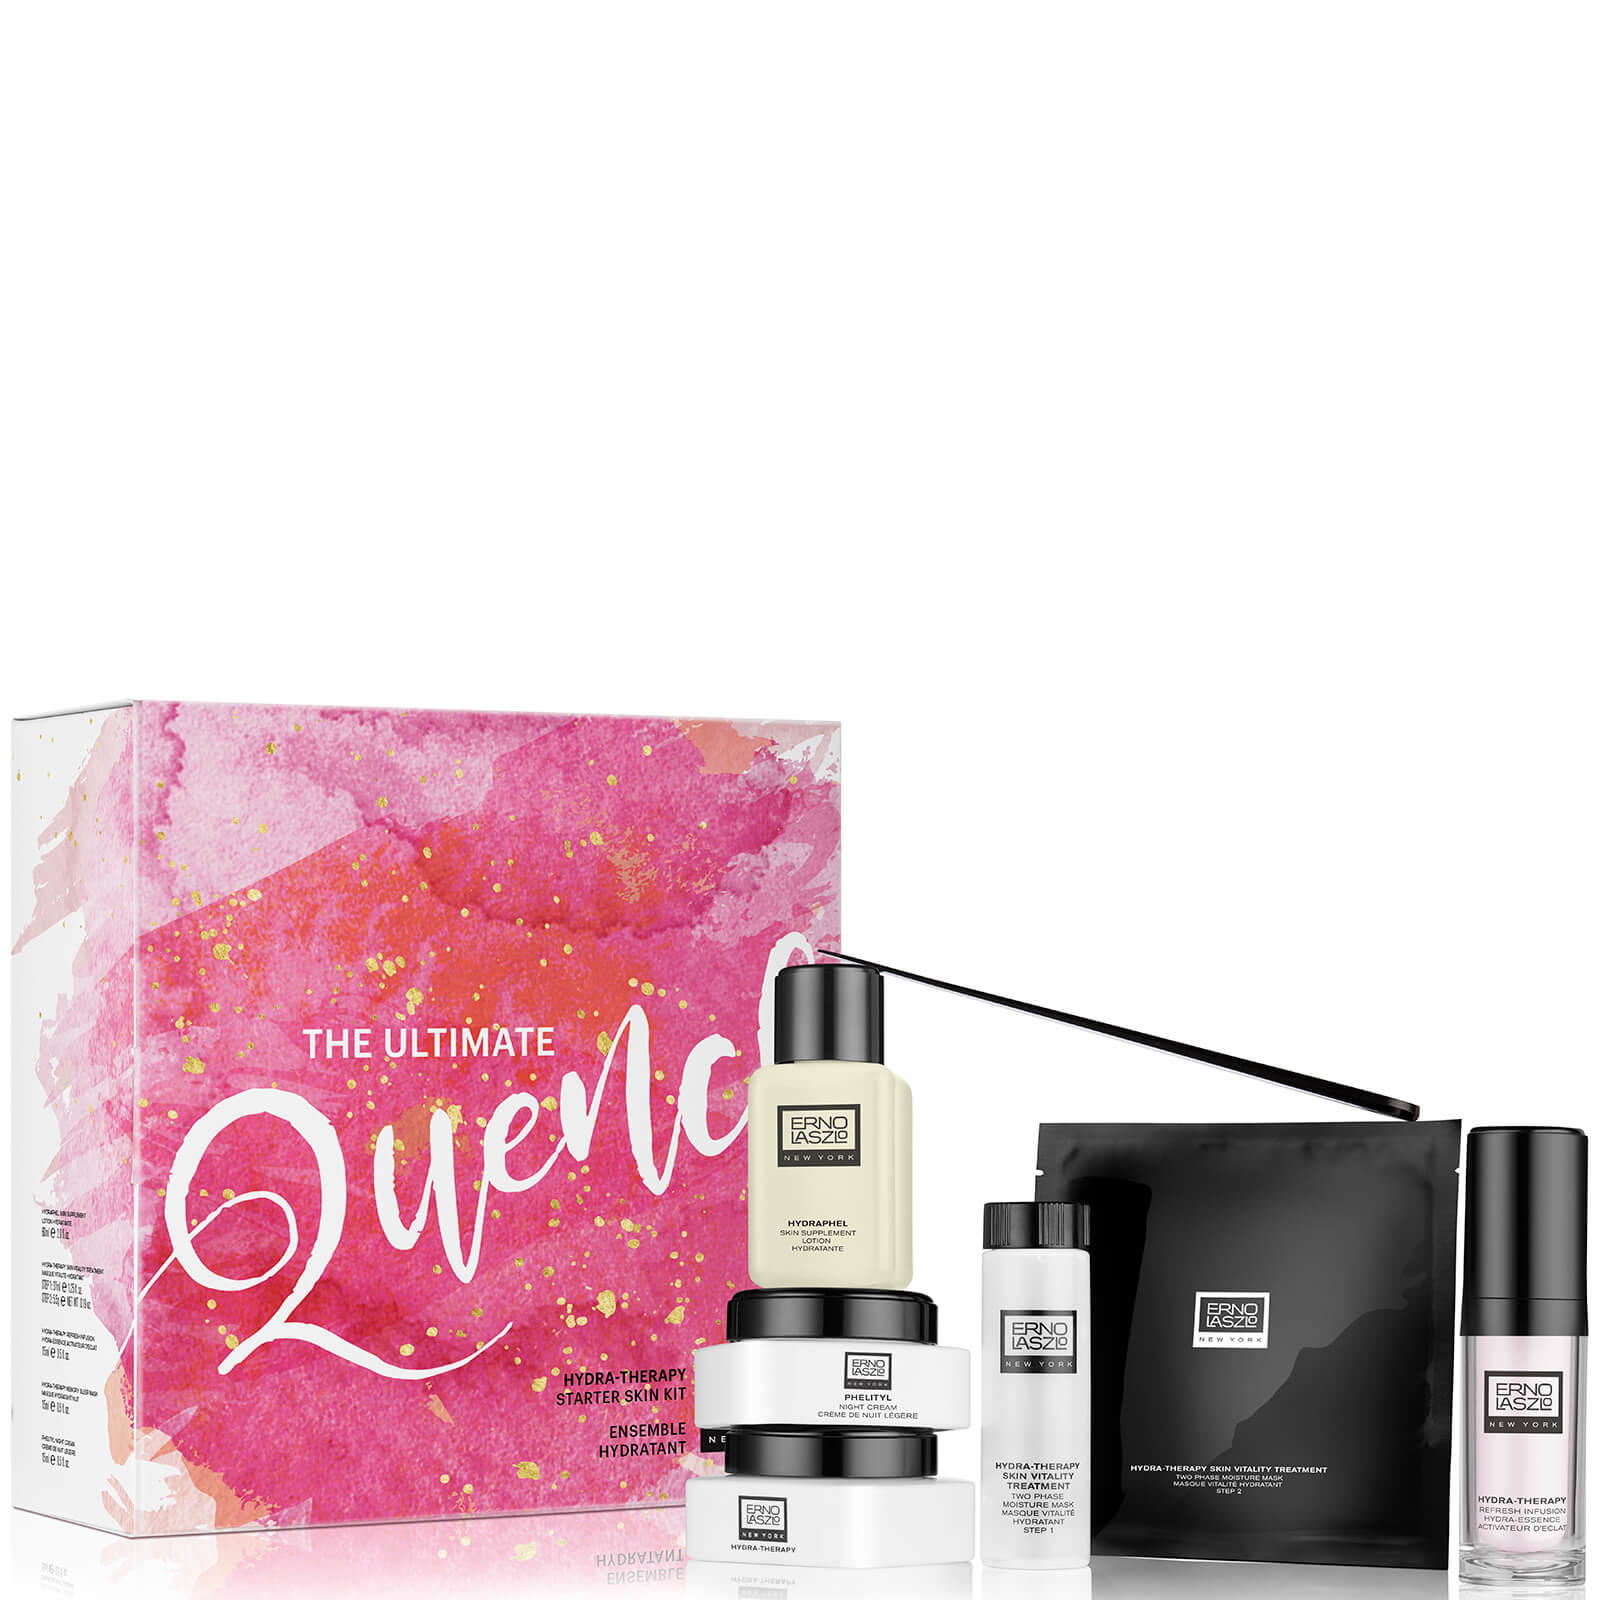 Erno Laszlo The Ultimate Quench: Hydra-Therapy Starter Set